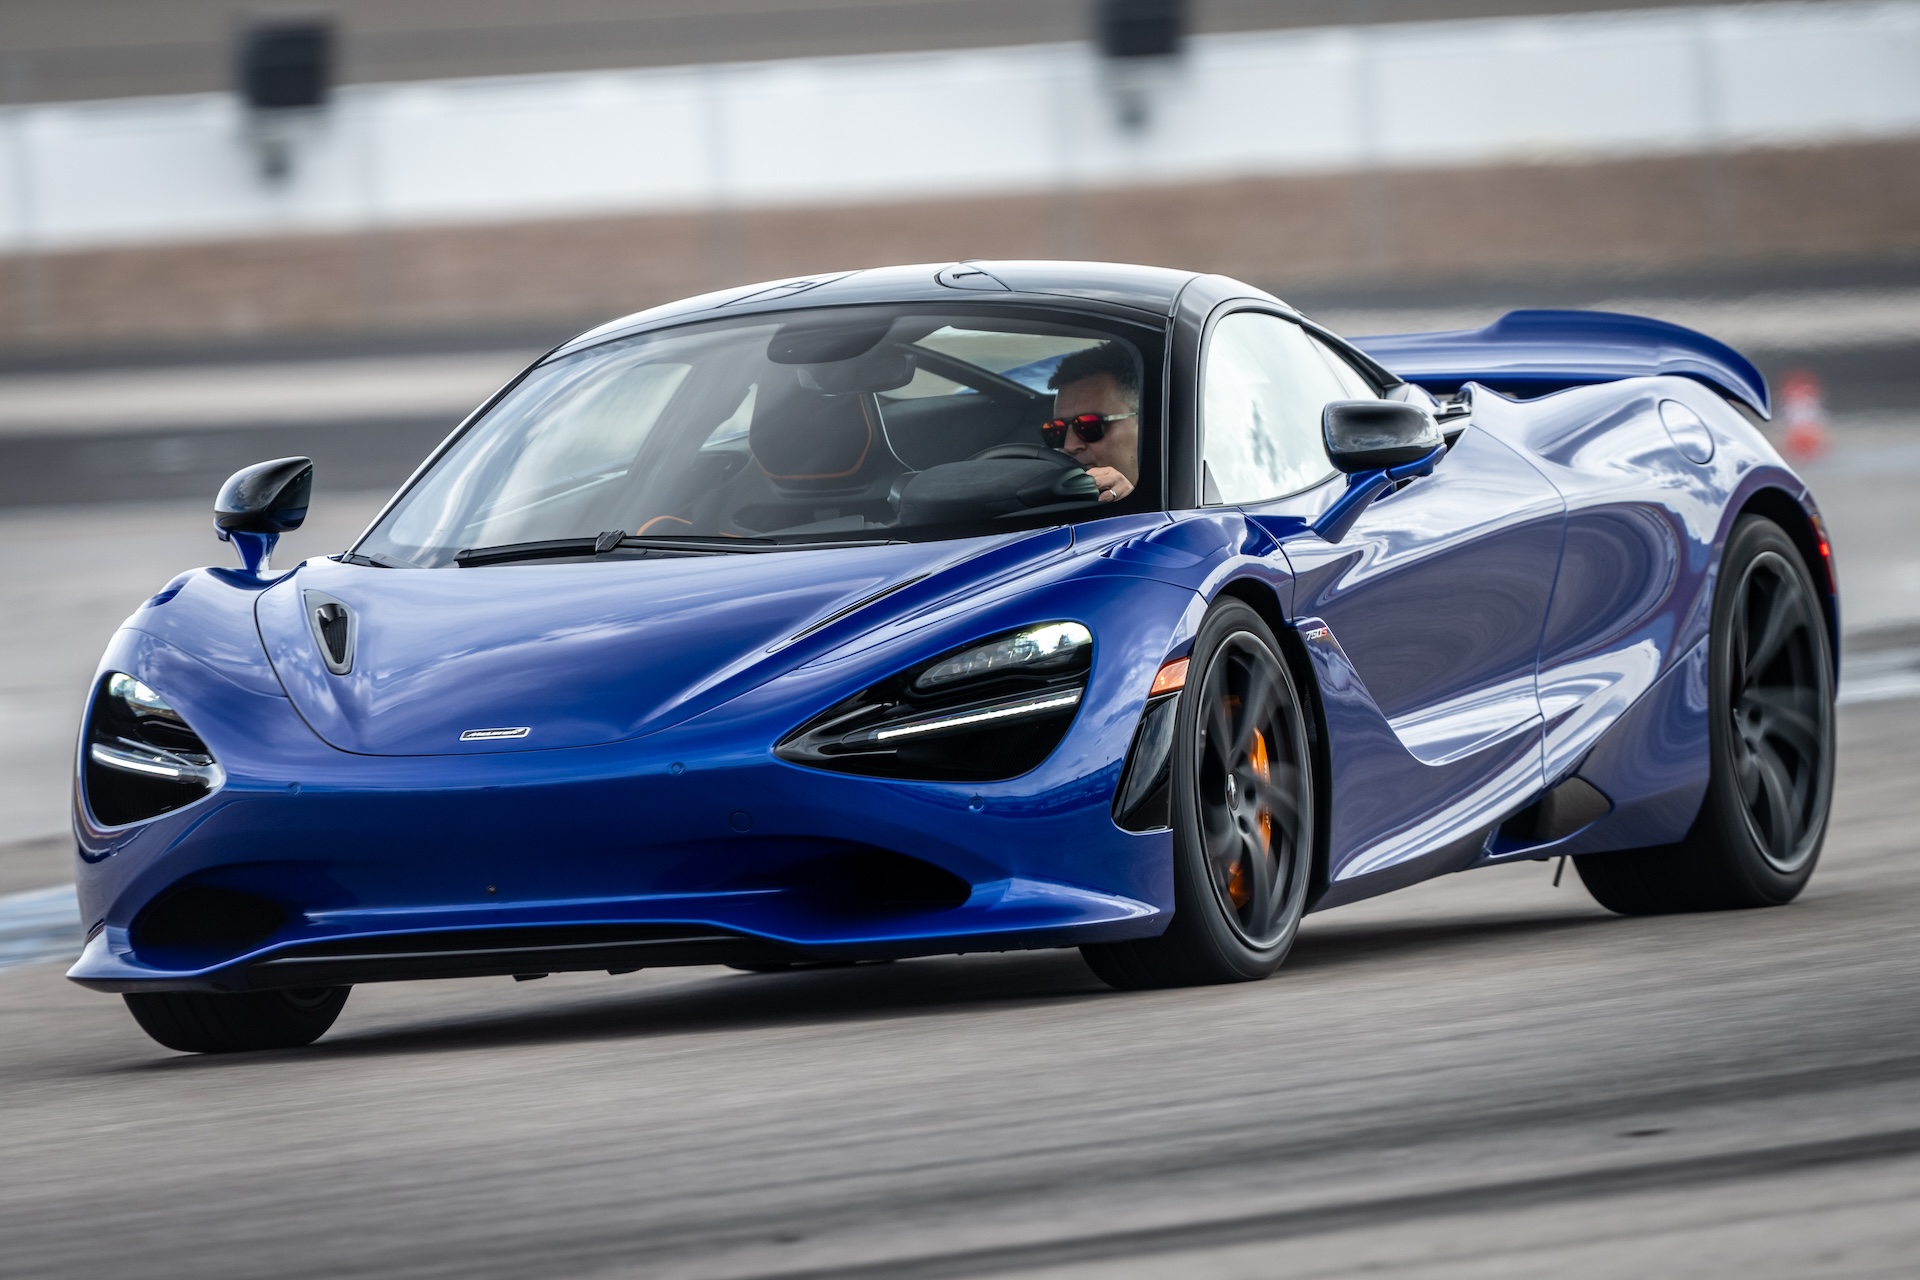 McLaren now fully owned by Bahrain Auto Recent